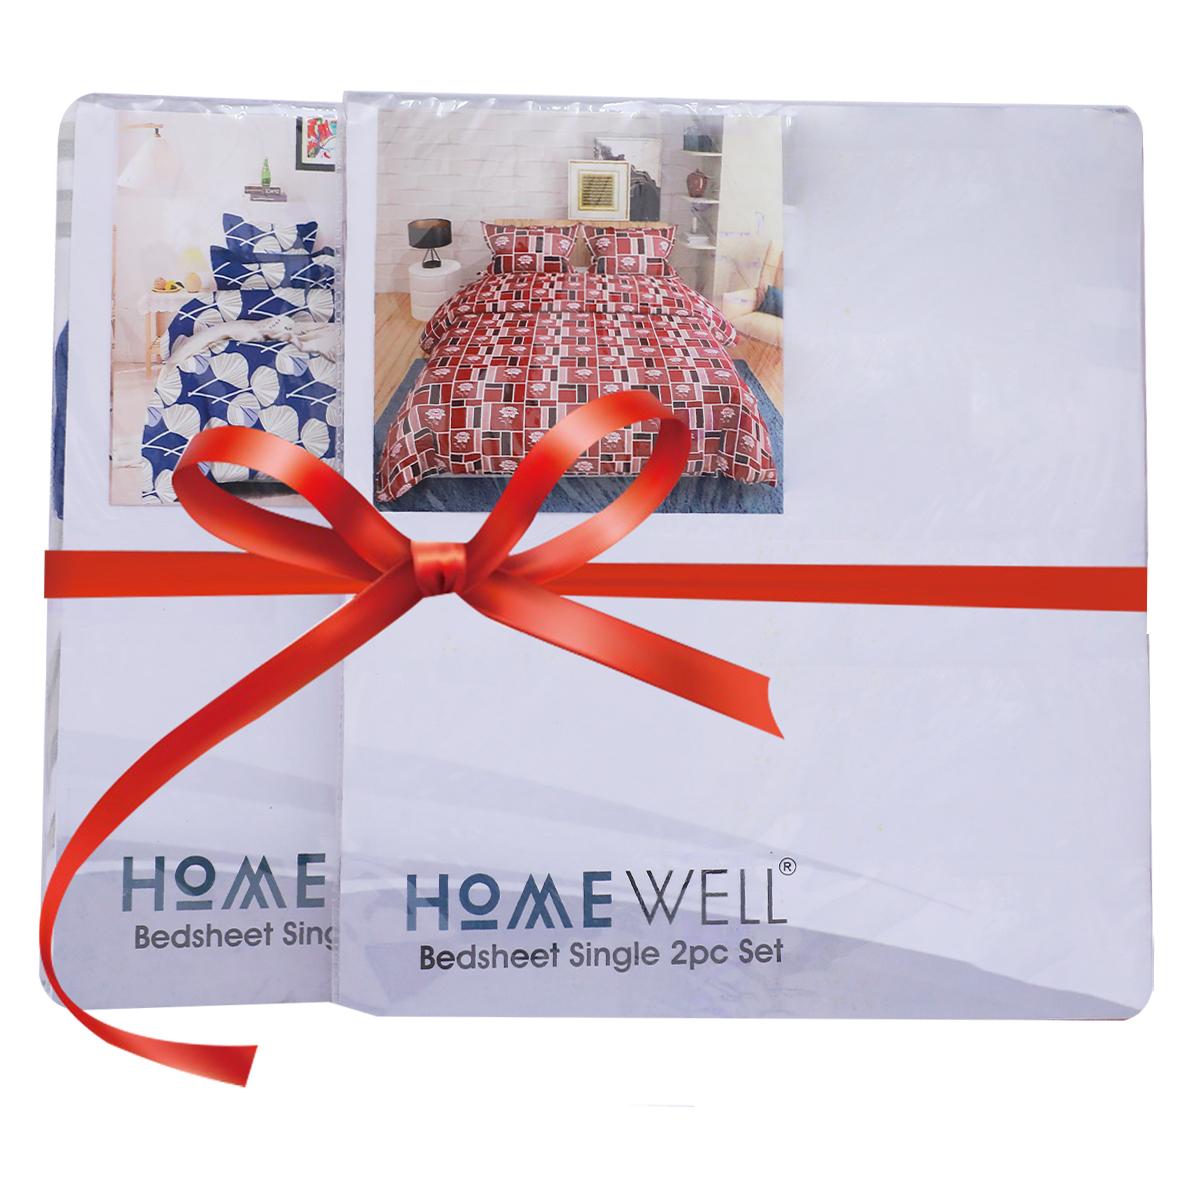 Home Well  Bed Sheet Single 2pc Set FR Assorted Colour and Assorted Design